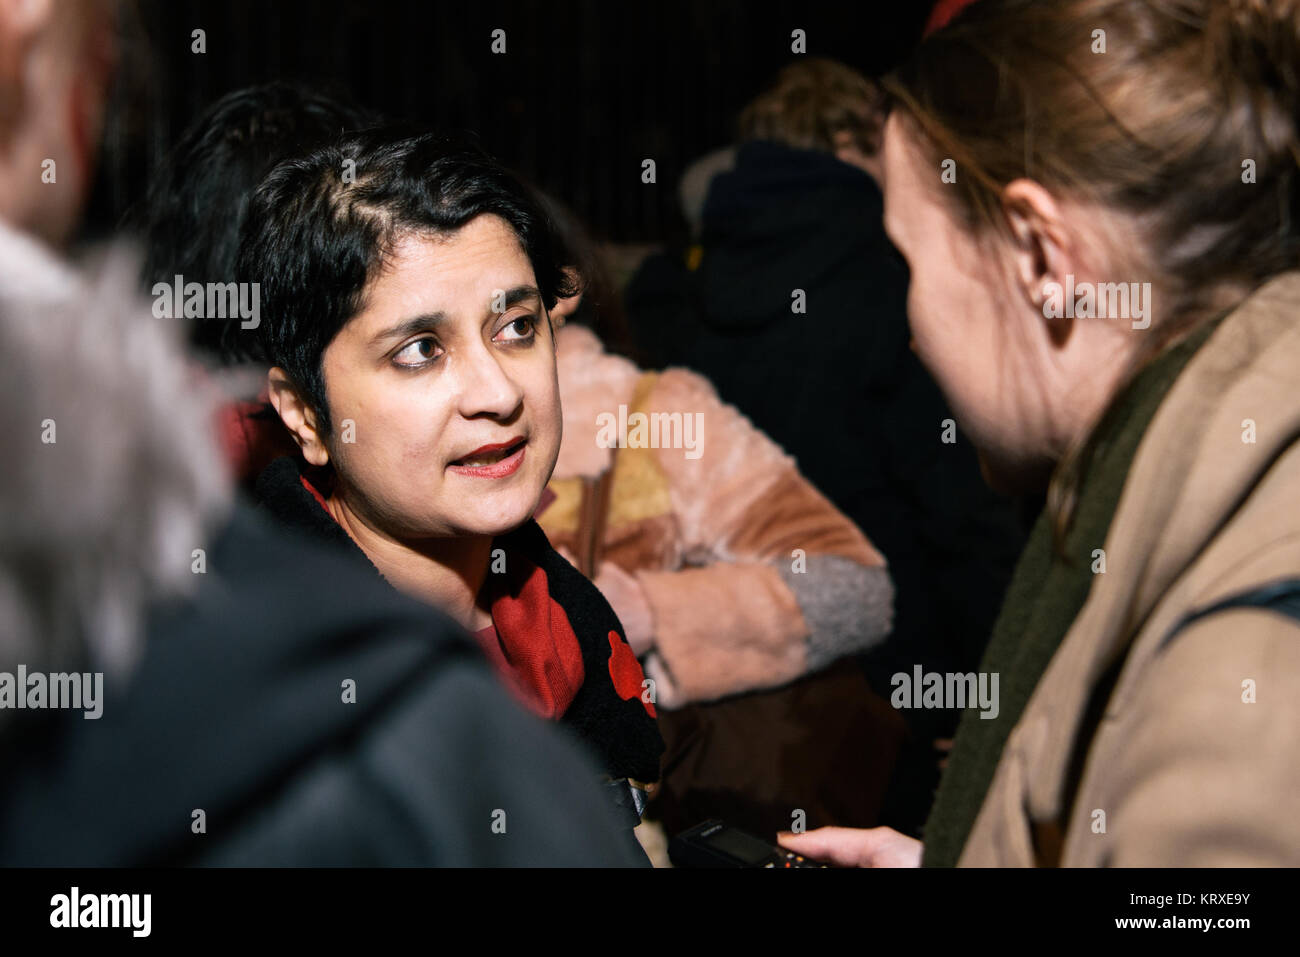 London, UK. 20th Dec, 2017. Shami Chakrabarti at a period poverty protest in Whitehall. Protesters on Whitehall were joined by a range of celebrities, activists, Labour and Liberal Democrat MPs to call for an end to period poverty. Credit: tinite photography/Alamy Live News Stock Photo